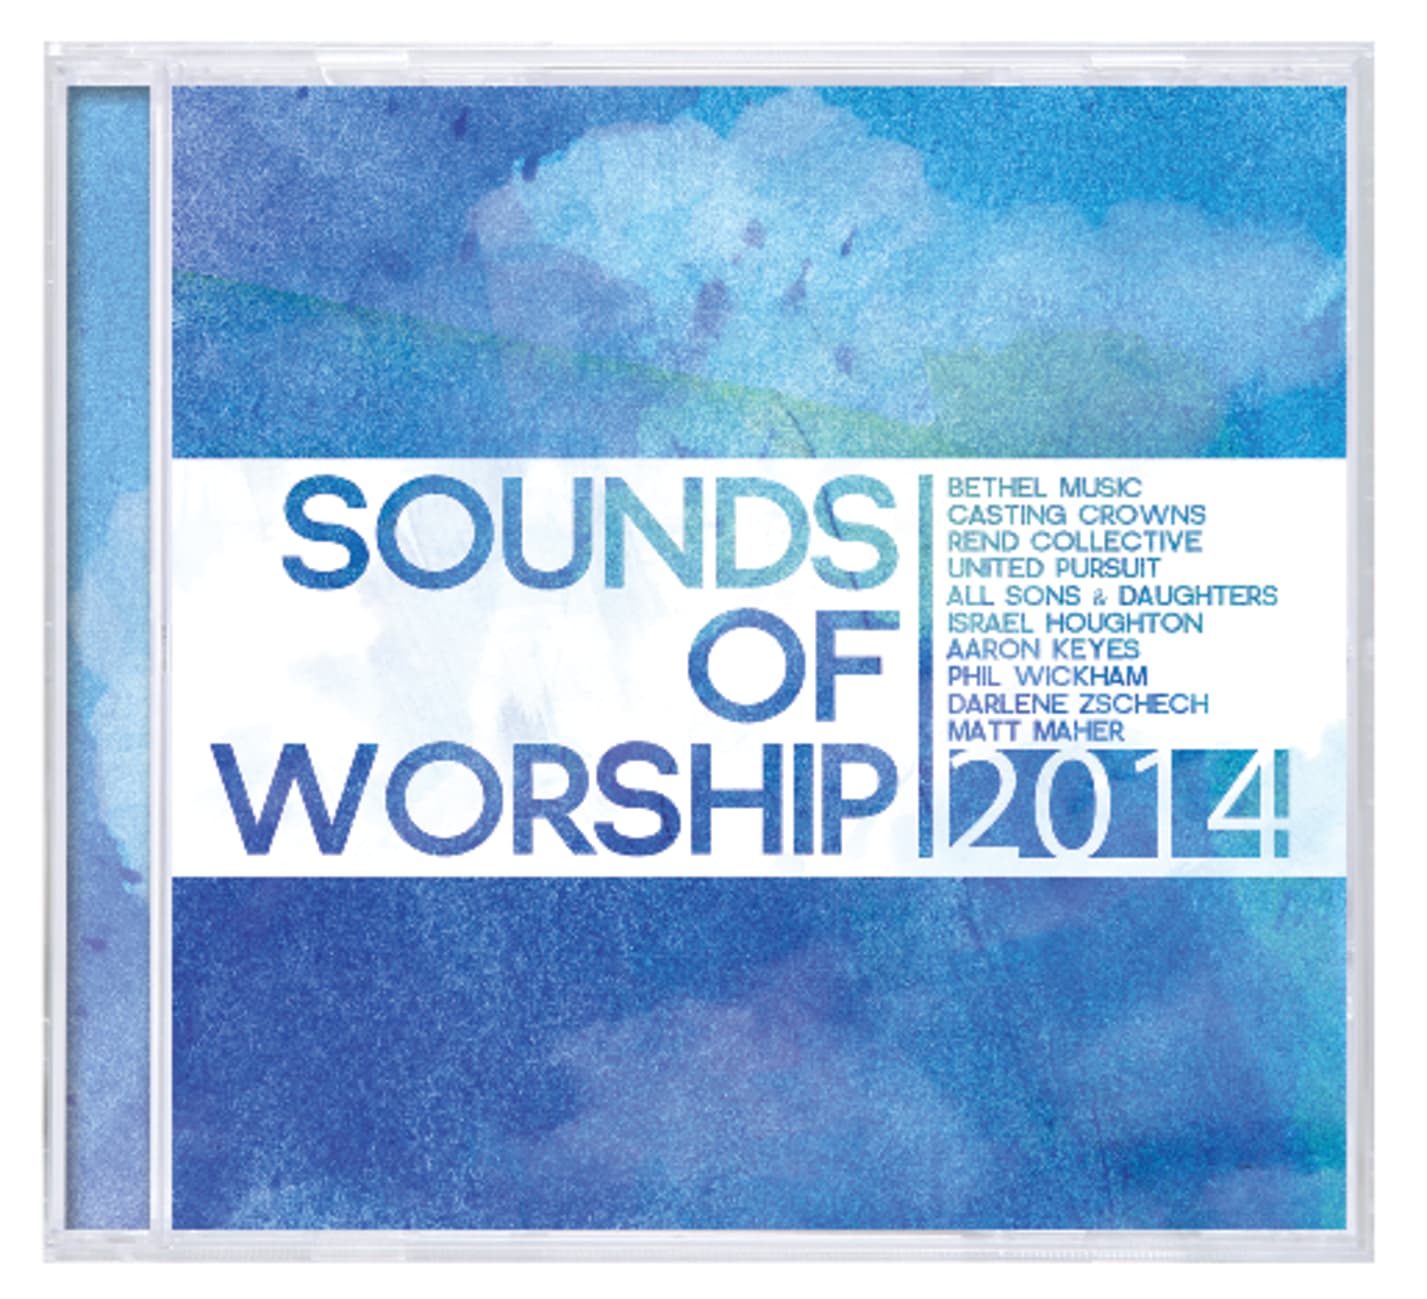 Sounds of Worship 2014 Double CD Compact Disc